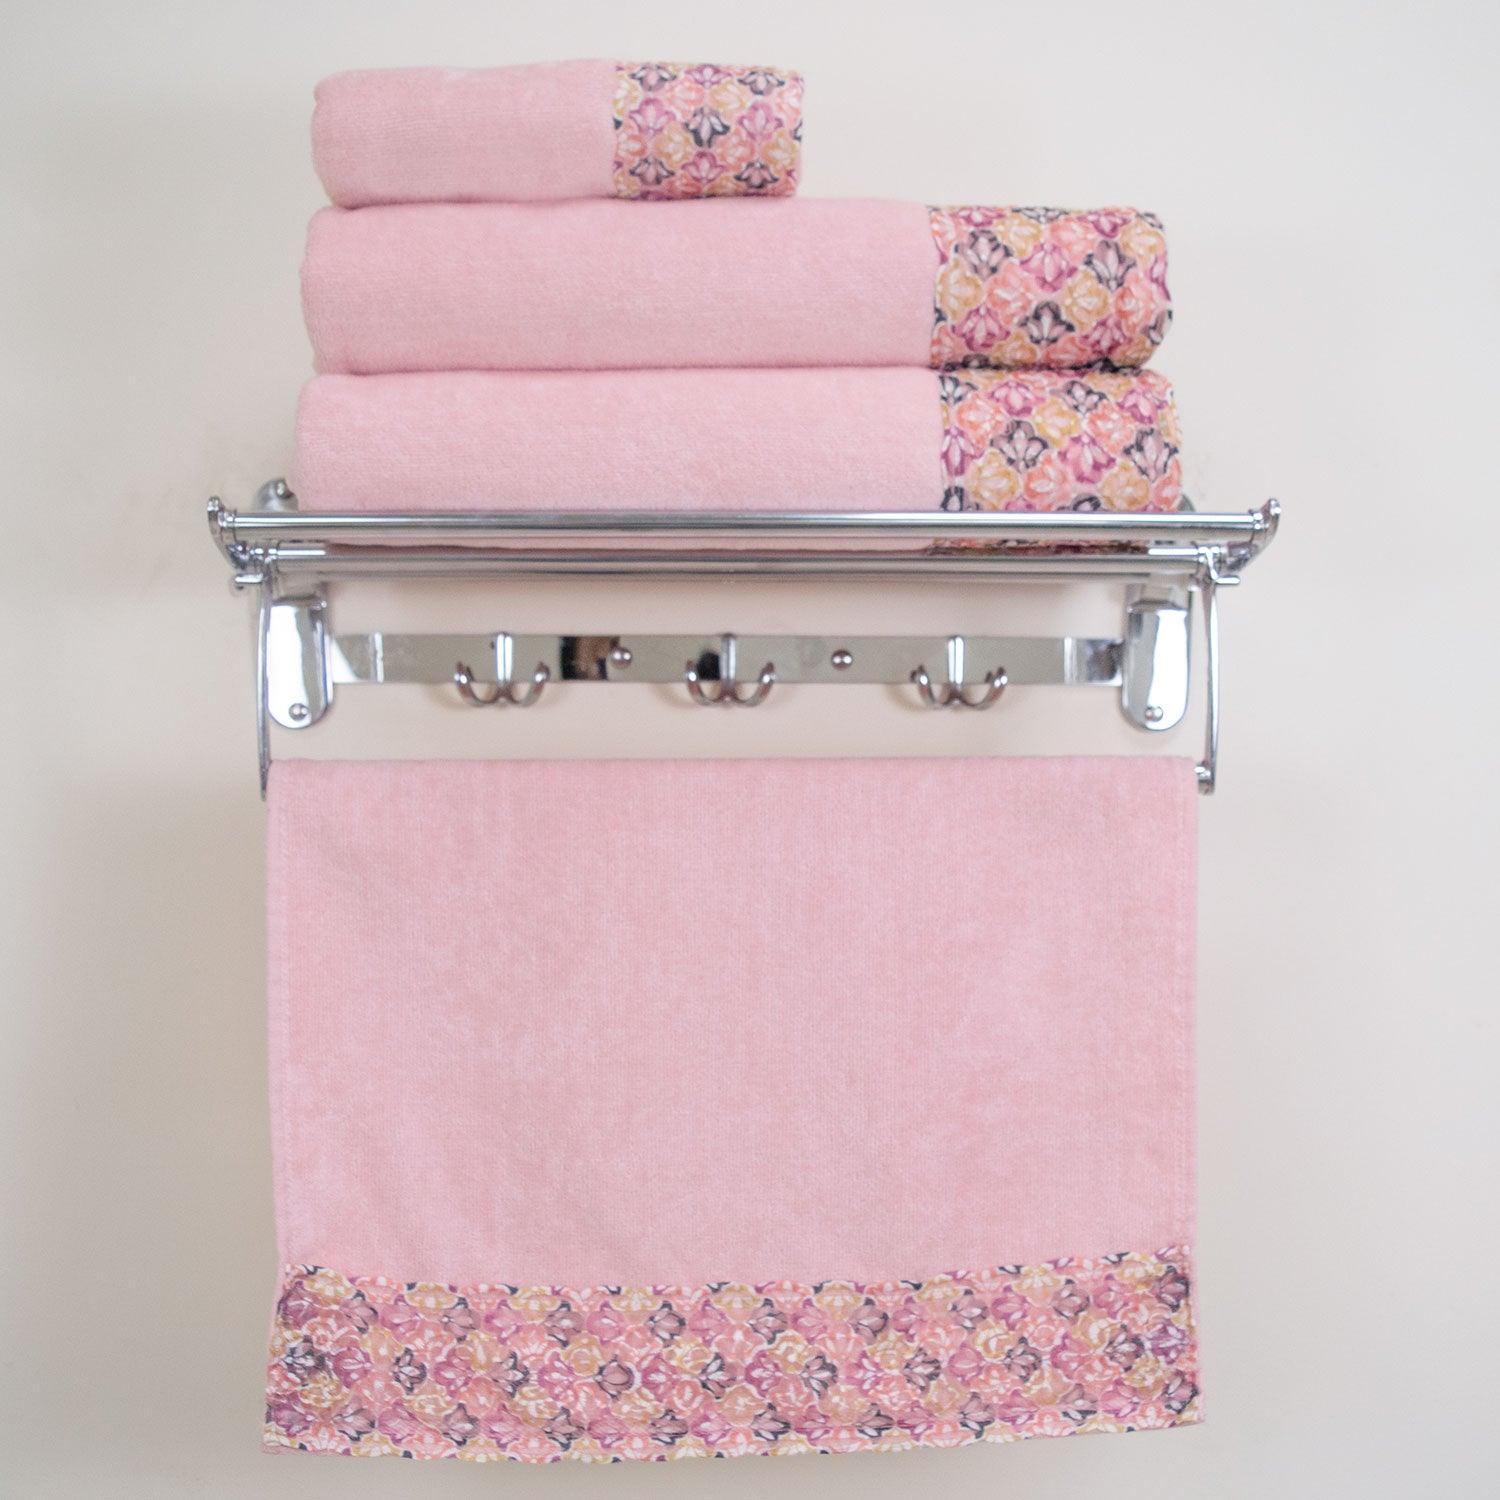 Prima Lace 100% Cotton Bath and Hand Towel Set of 4 | Ultra Soft, Highly Absorbent Luxurious Towels